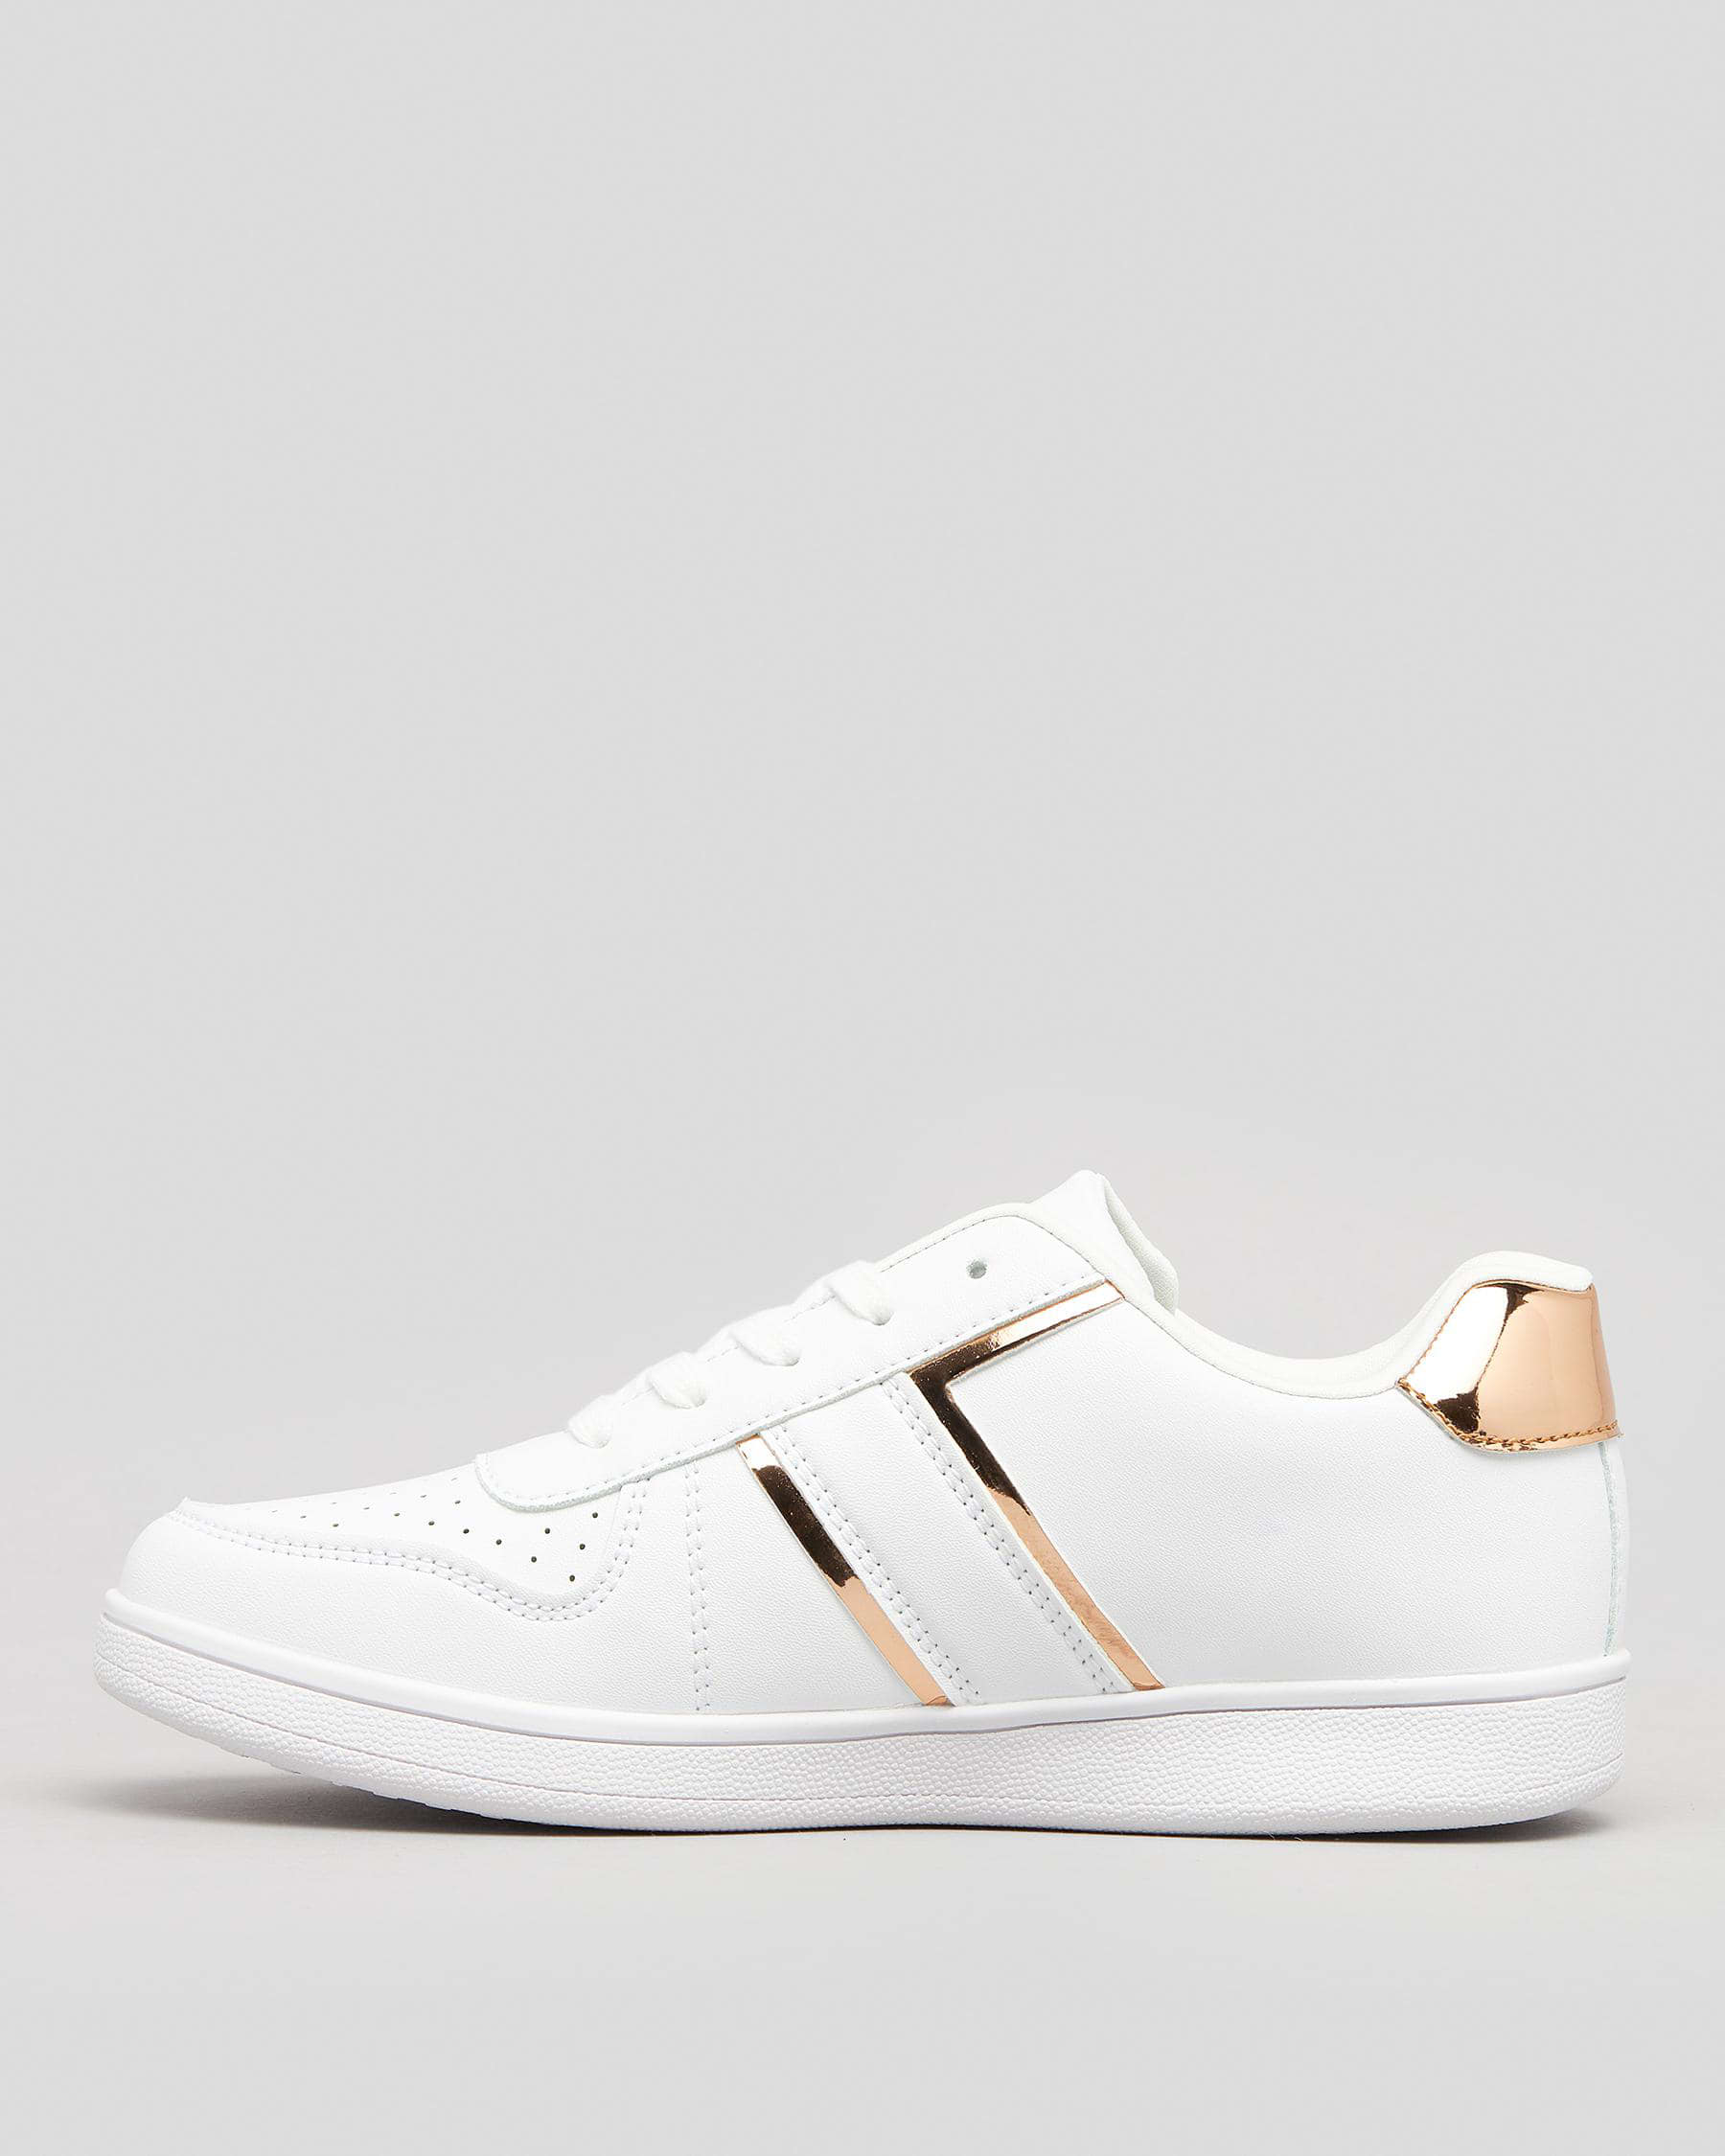 Ava And Ever Ezra Shoes In White/rose Gold - Fast Shipping & Easy ...